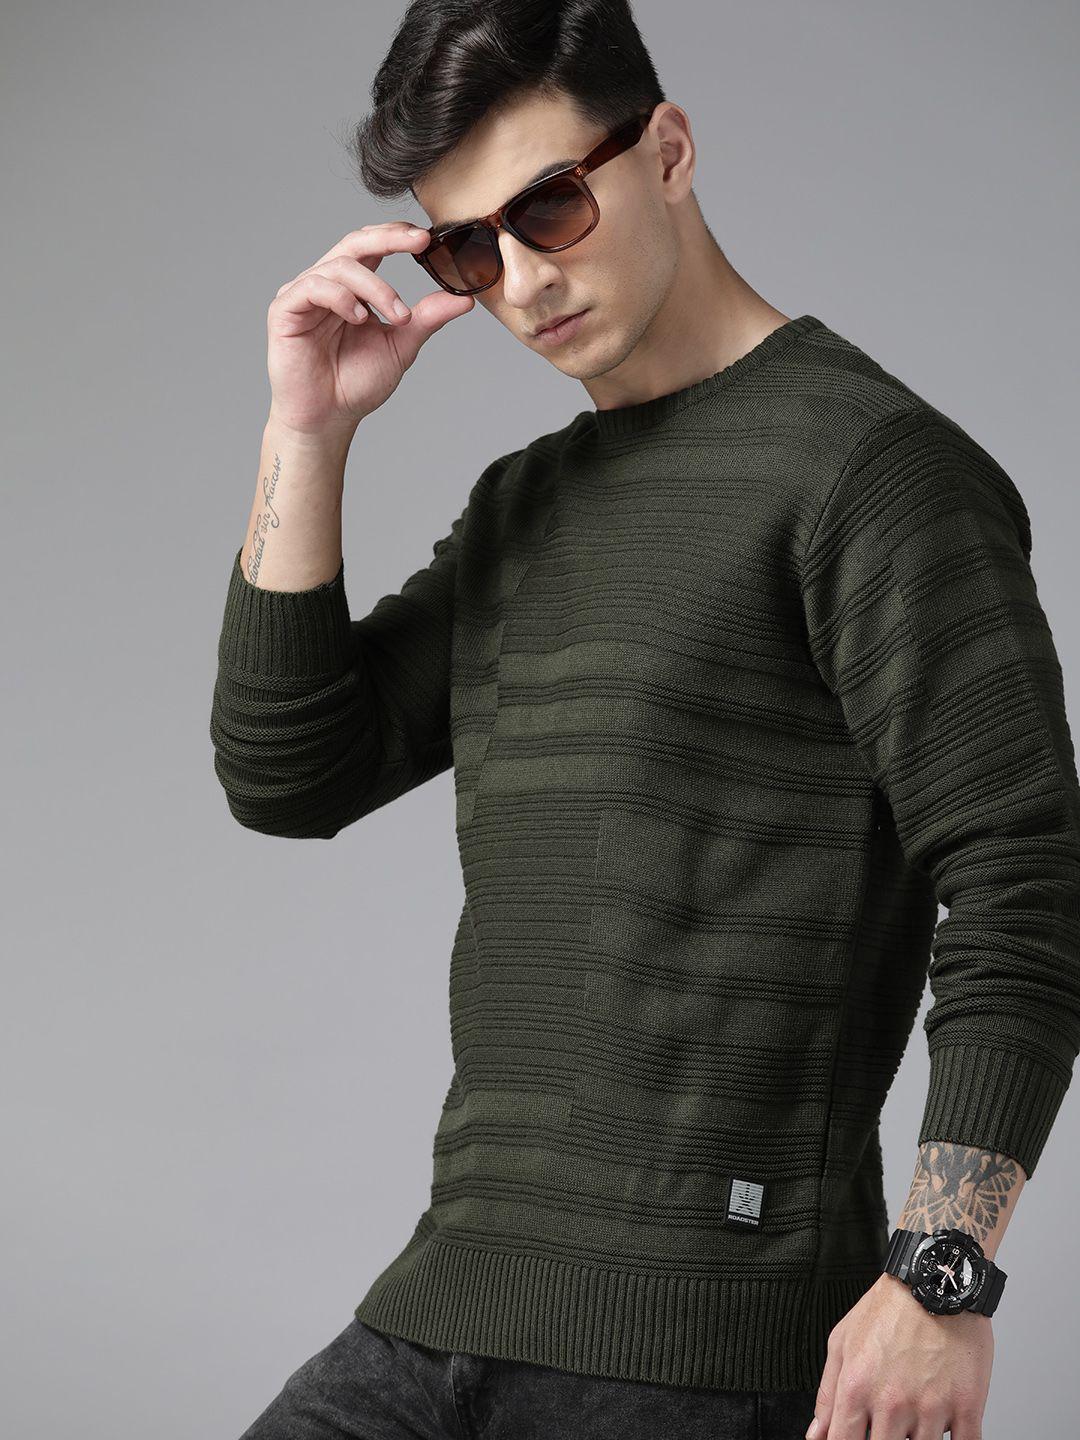 the roadster lifestyle co. horizontally striped pullover